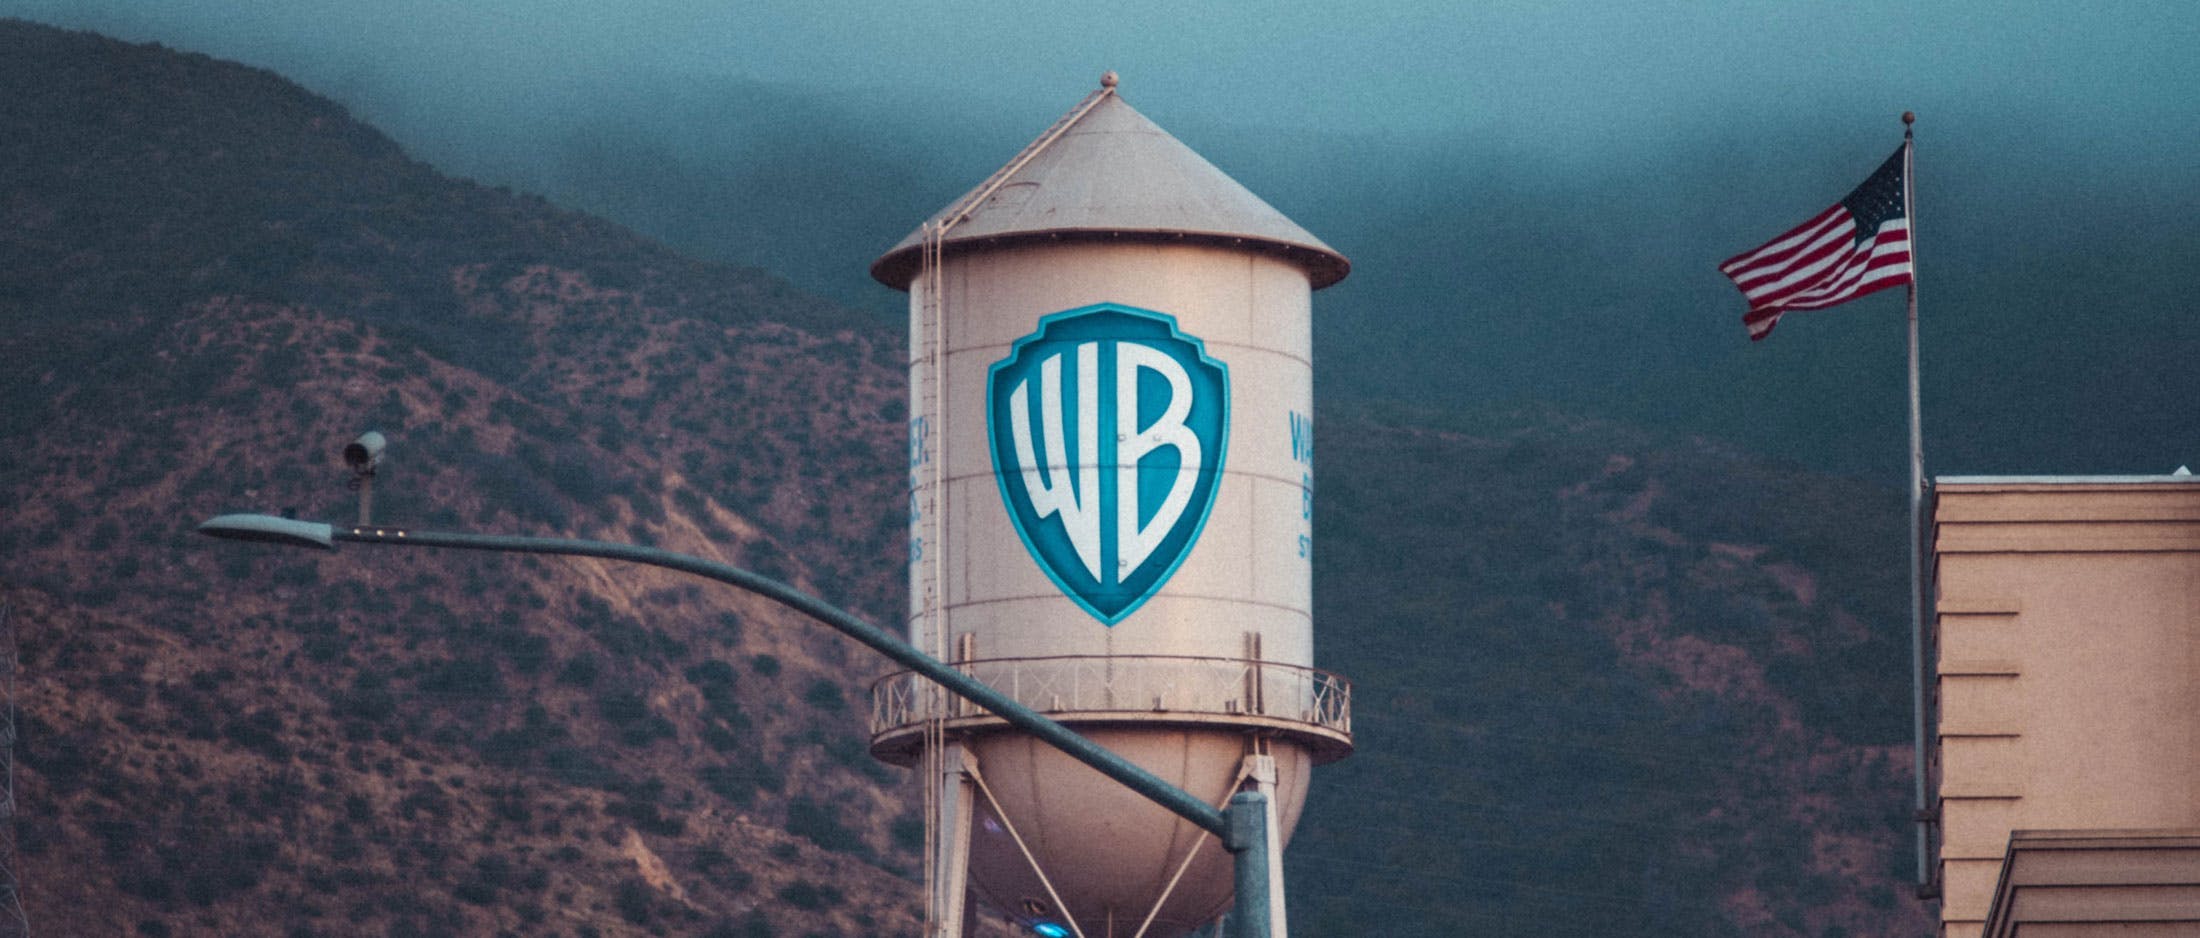 WB water tower